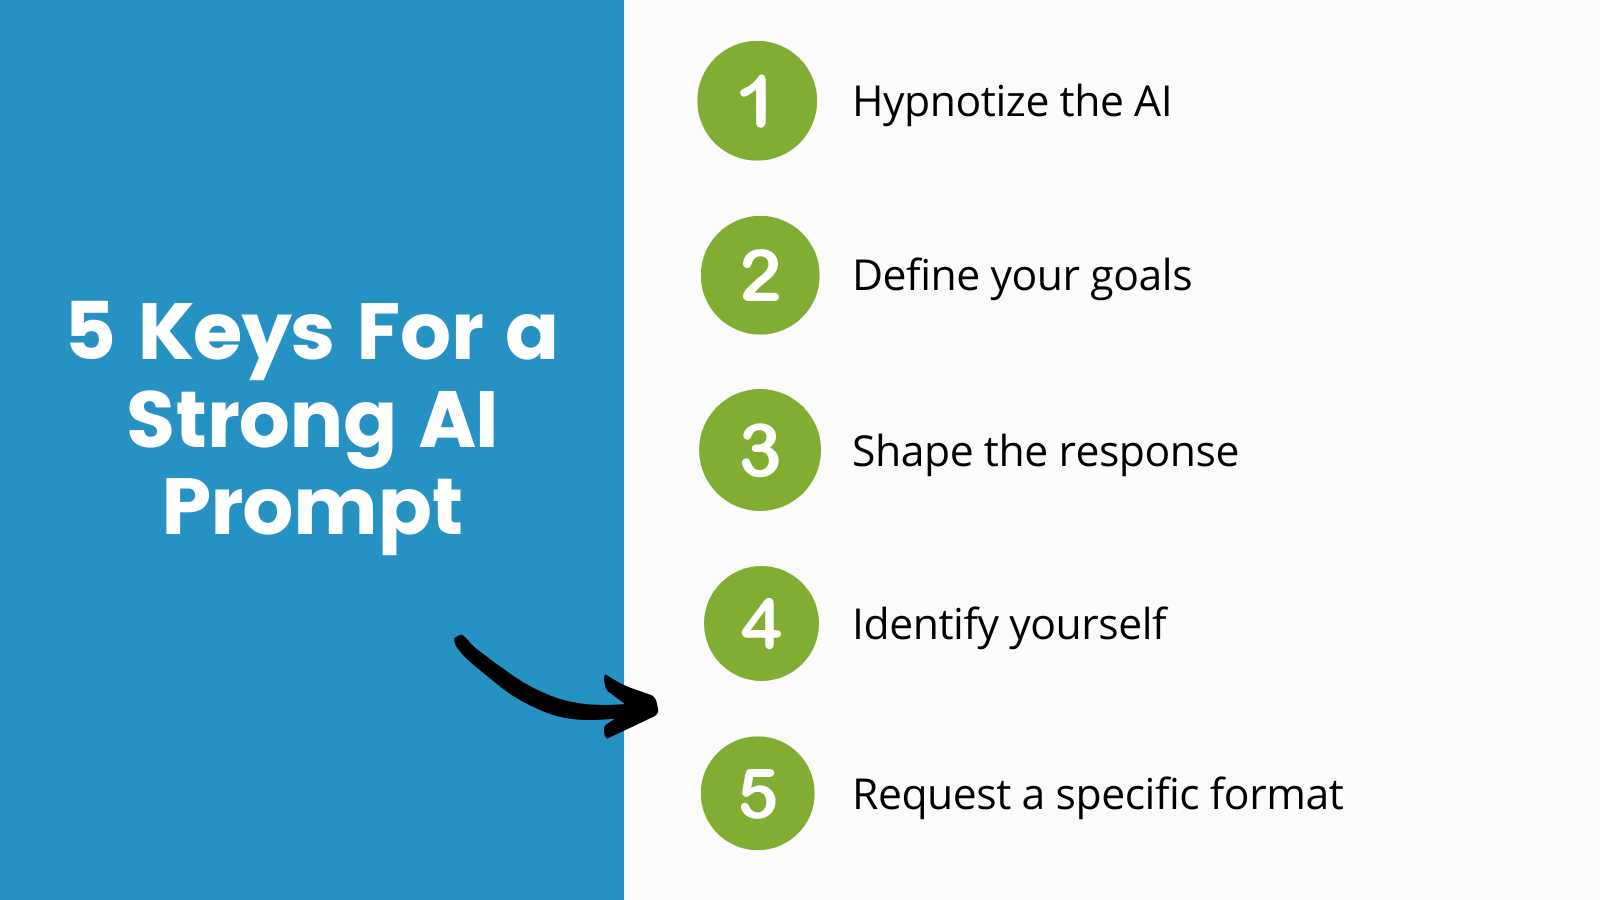 Info-graphic for 5 Keys for a Strong AI Prompt